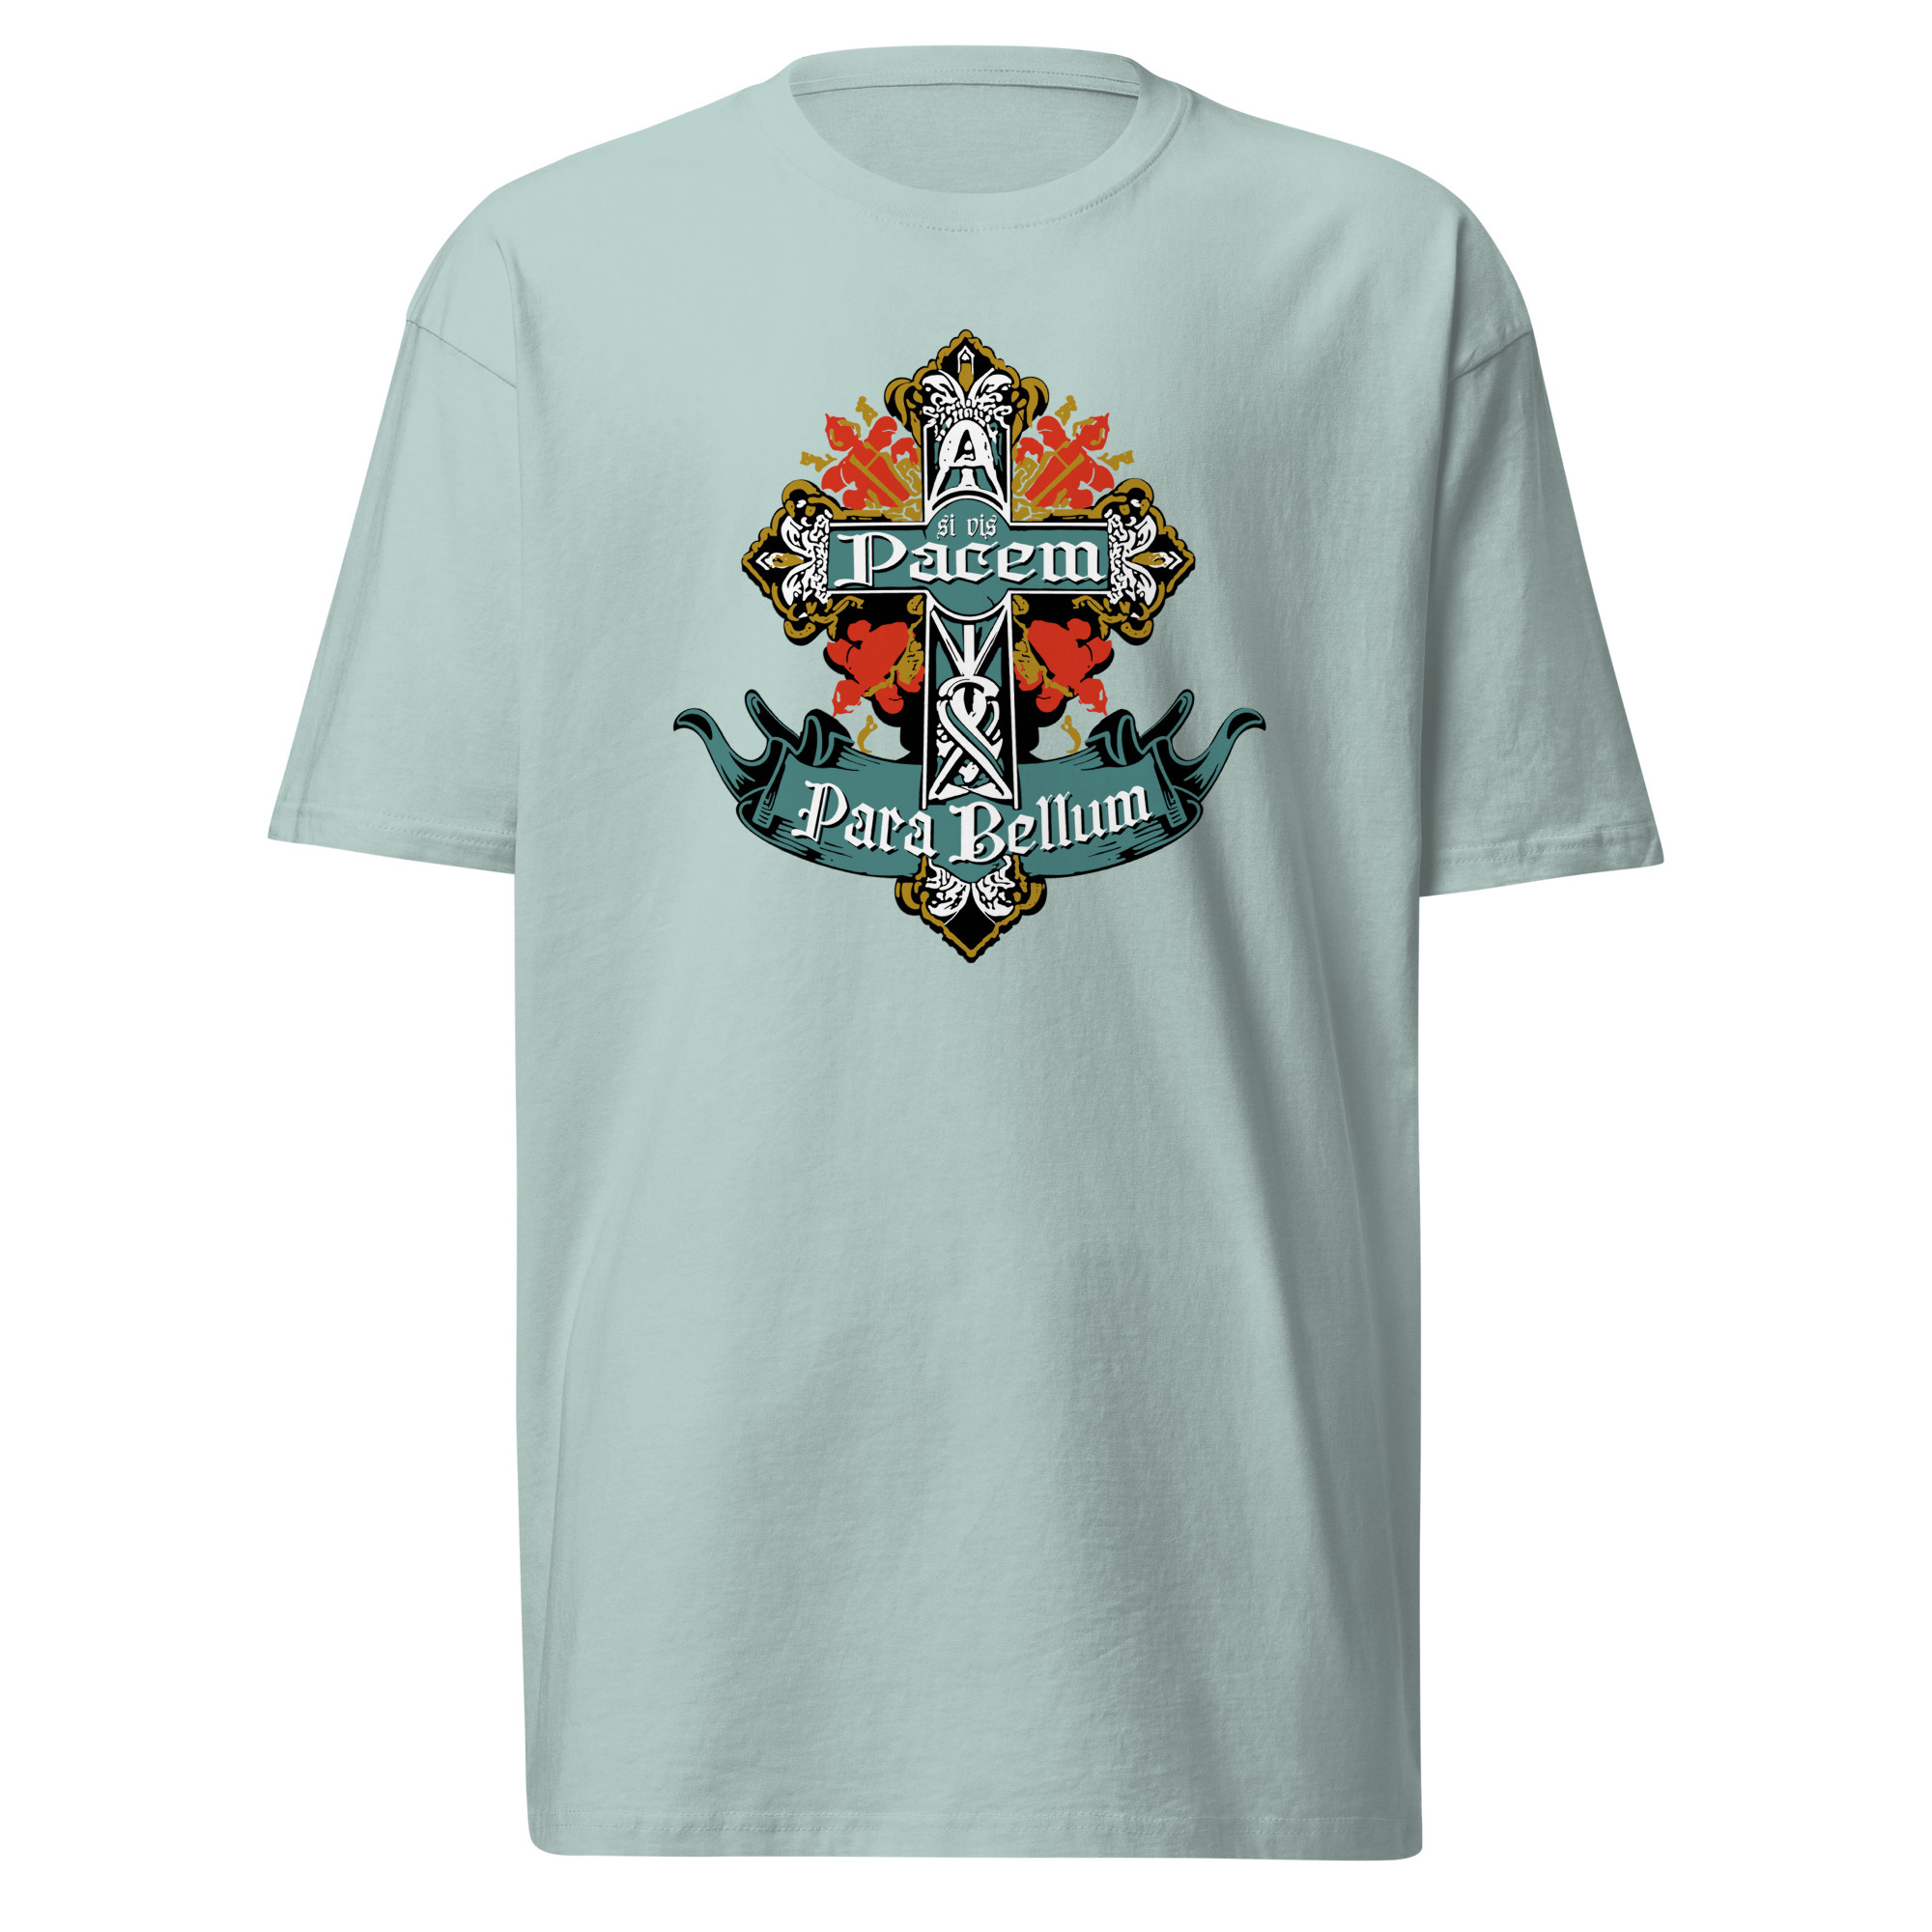 If You Want Peace, Prepare For War T-Shirt - Agave / L